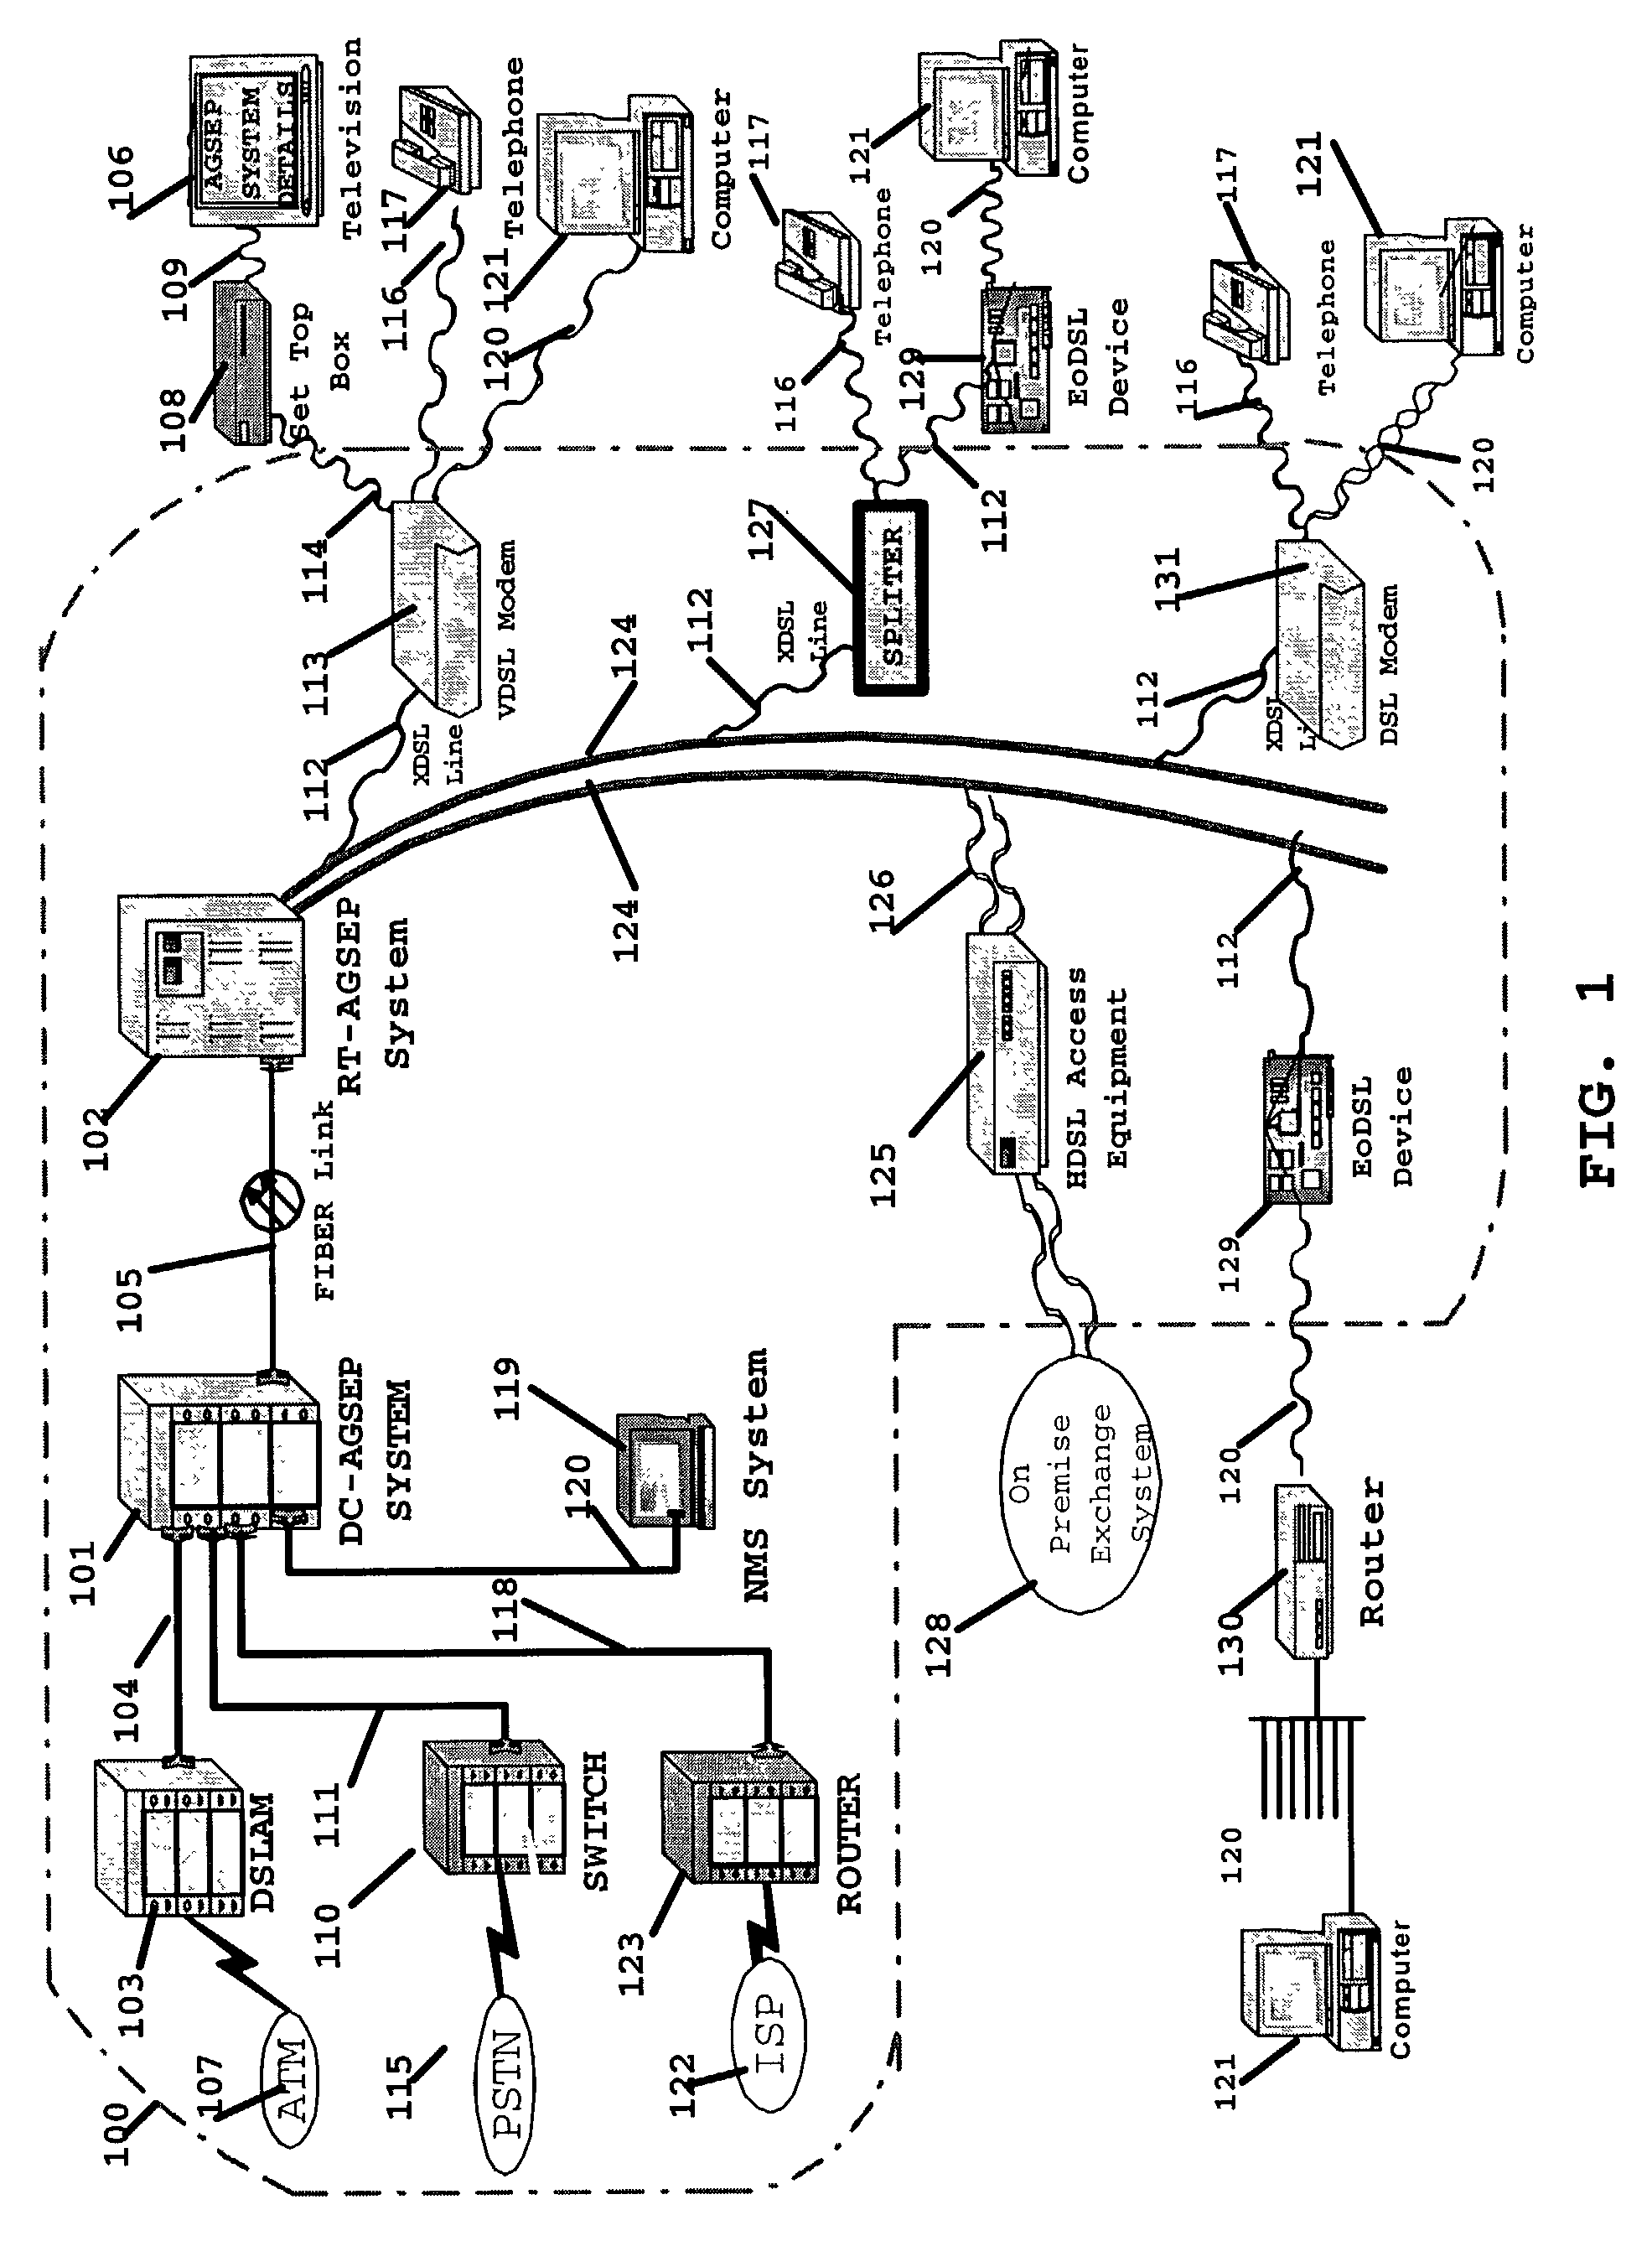 Network architecture and system for delivering bi-directional xDSL based services